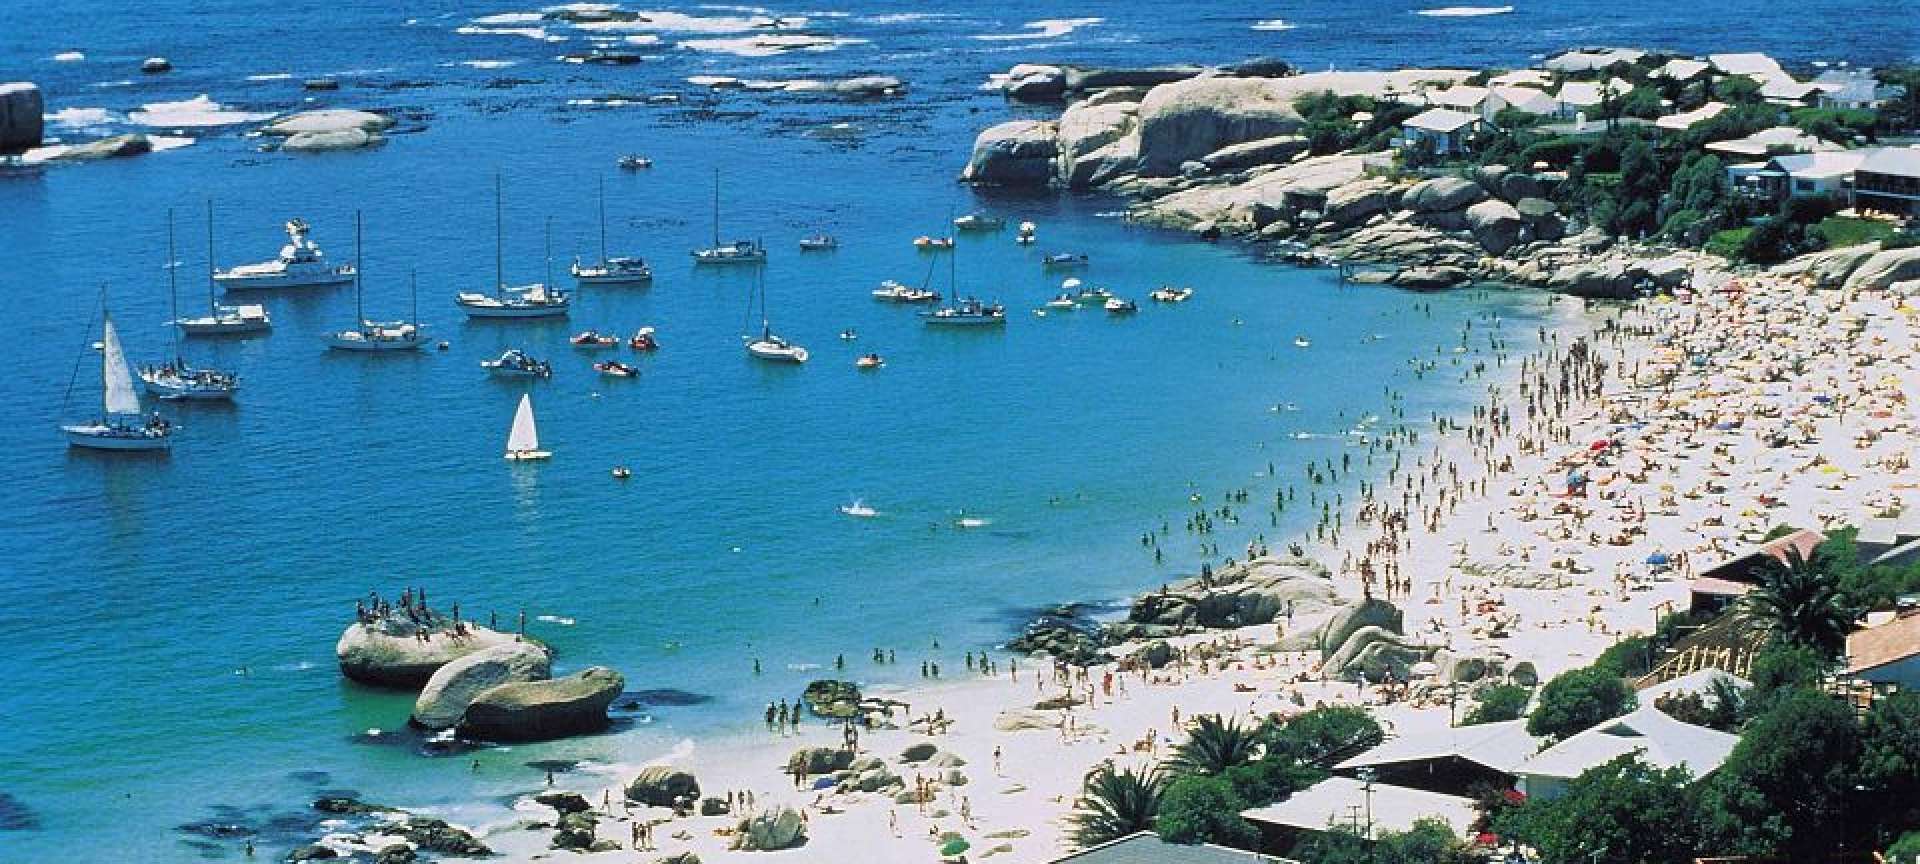 world famous clifton beach in cape town holiday